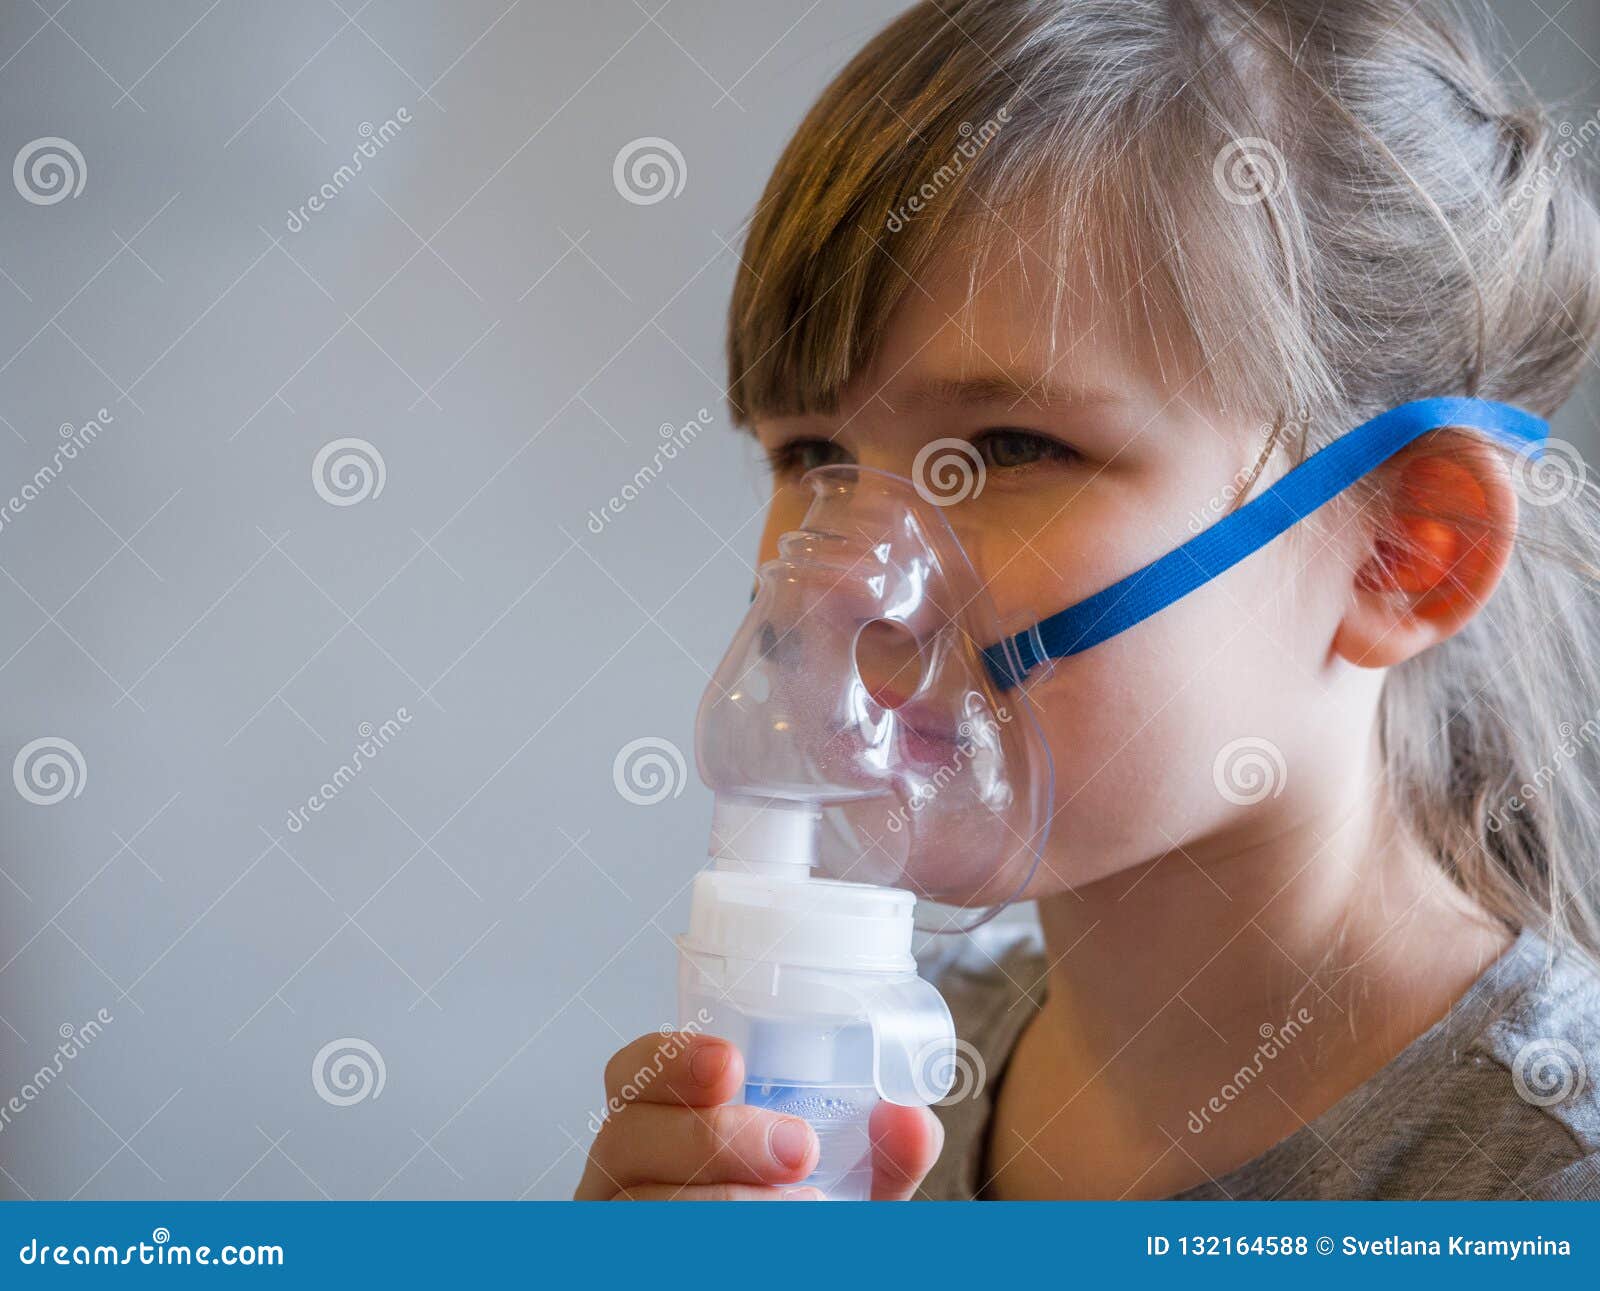 Child Making Inhalation With Mask On His Face. Asthma ...